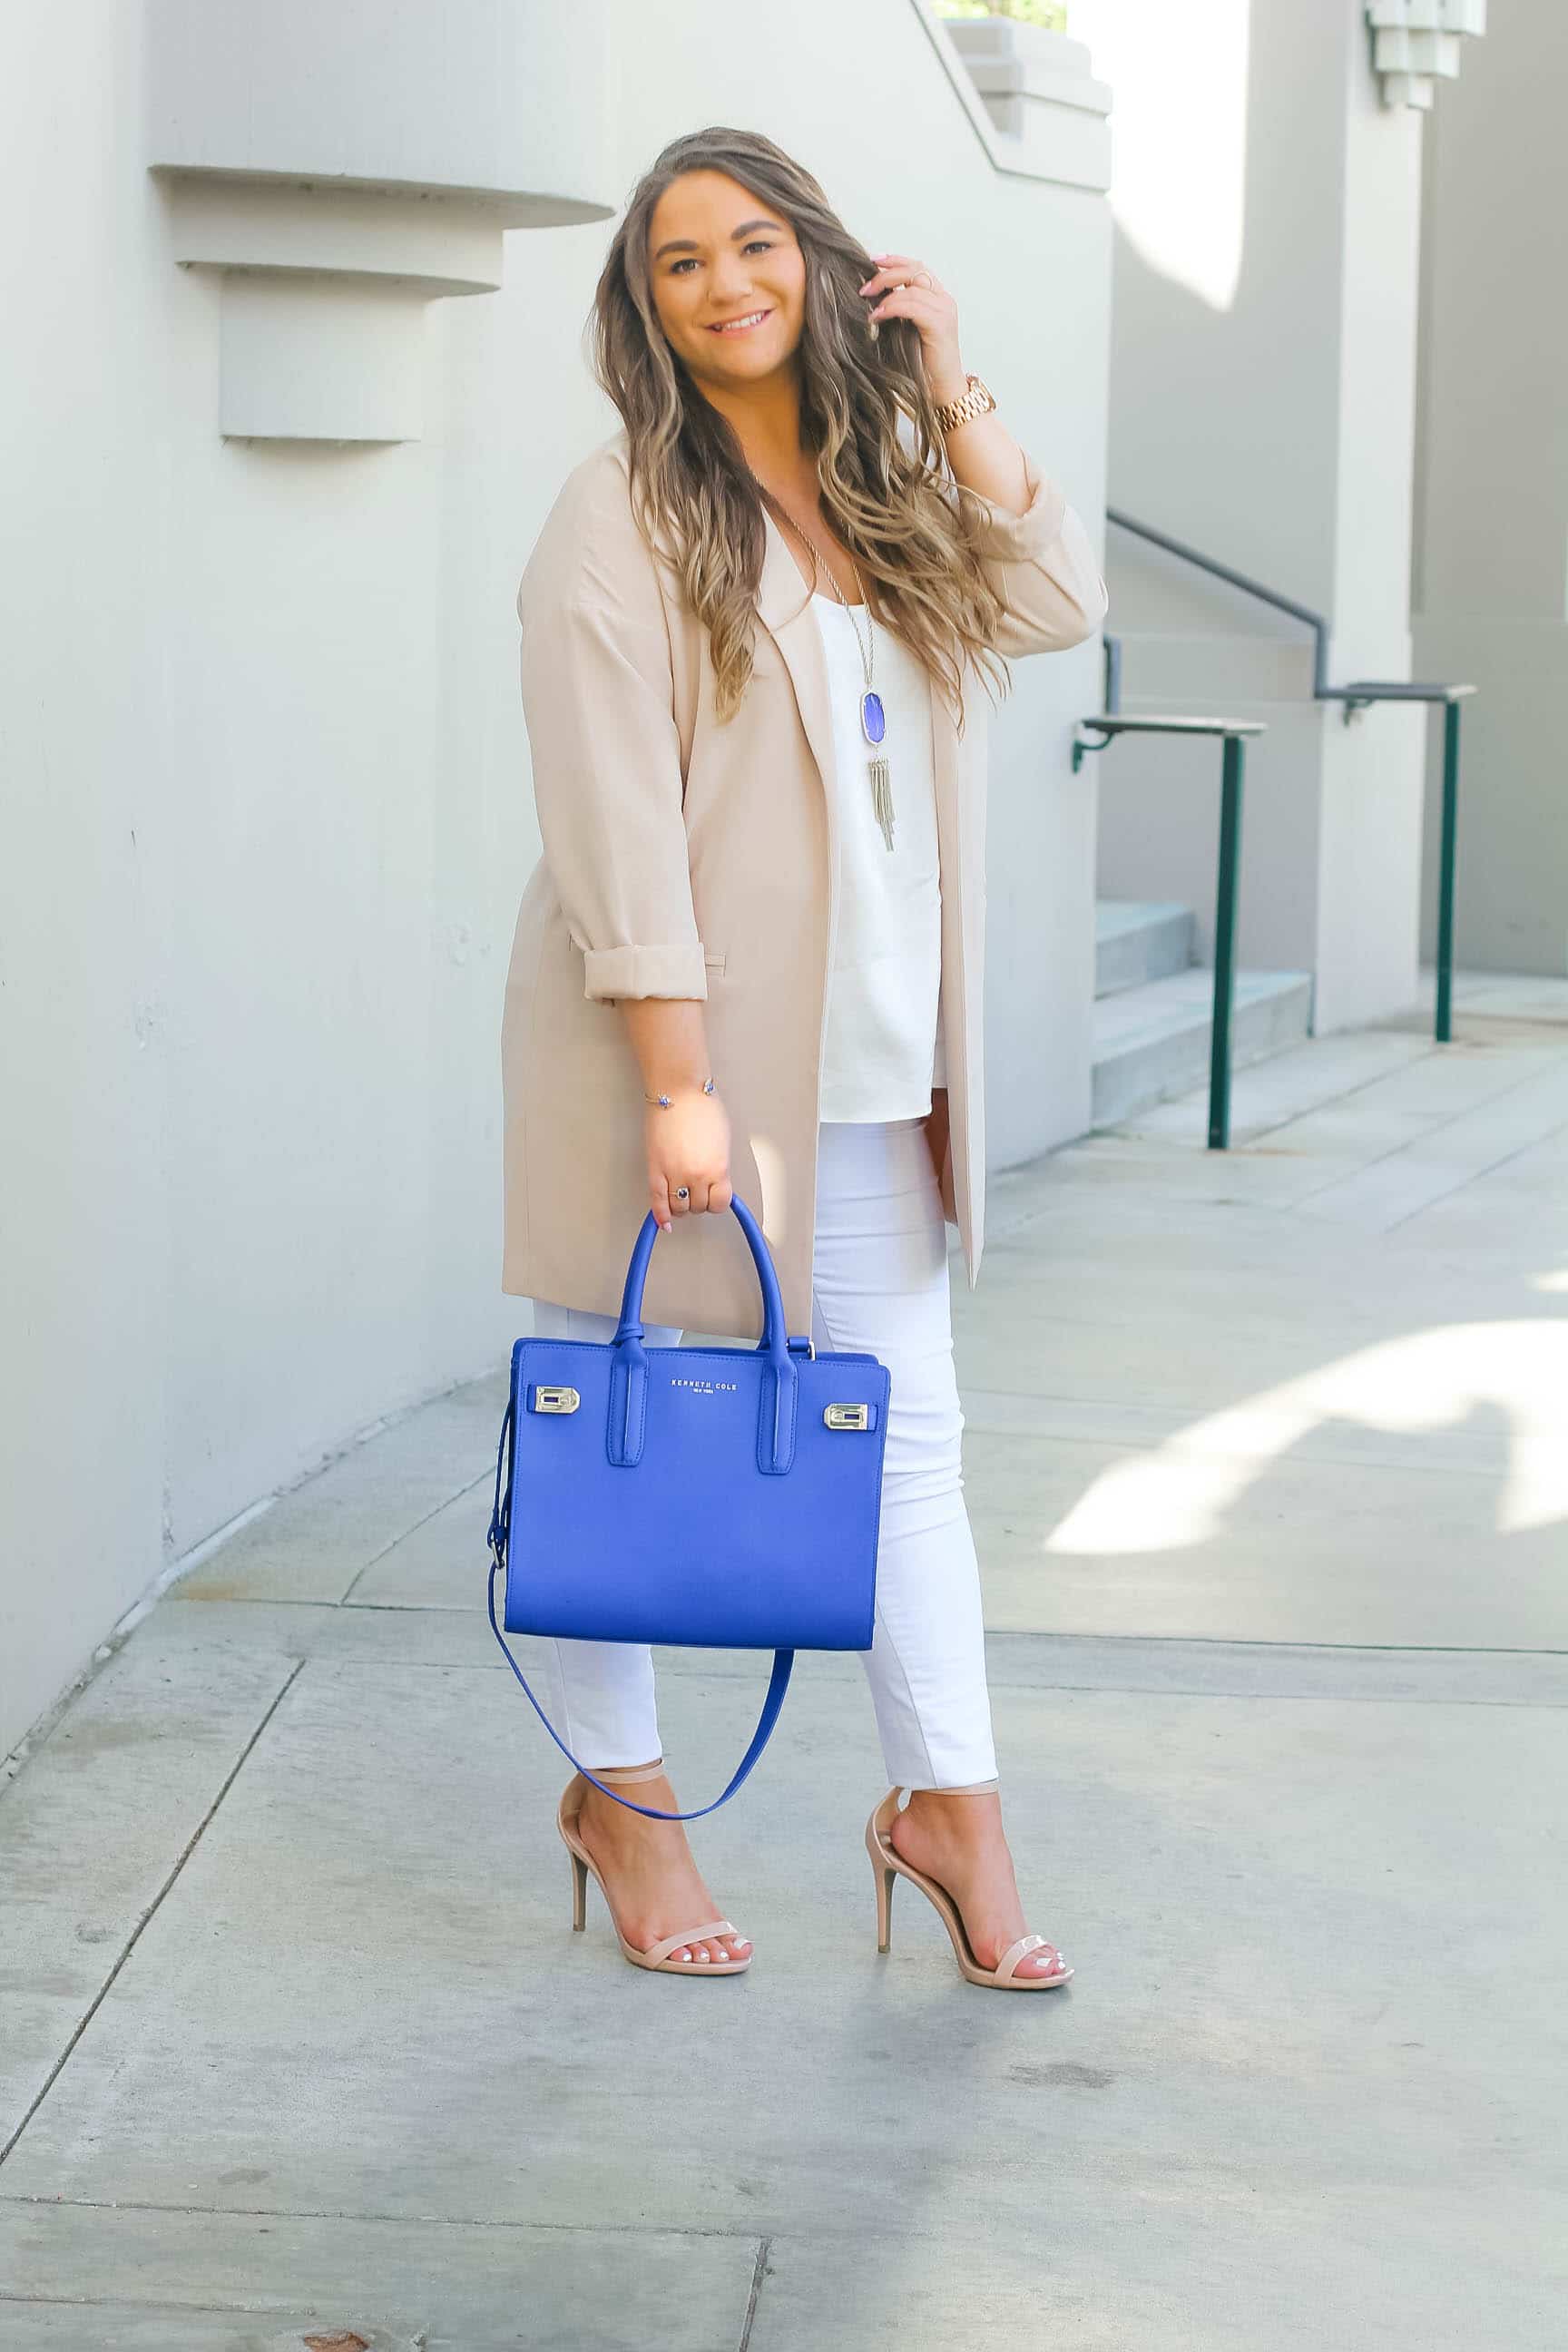 missyonmadison, fashion blogger, missyonmadison instagram, outfit inspo, la blogger, cobalt blue satchel, style blogger, summer style, nude ankle strap heels, old navy, white skinny jeans, old navy white rockstar jeans, beverly hills city hall, nude duster blazer, duster blazer, nude blazer, white chiffon camisole, topshop camisole, raybans, pop of color, 